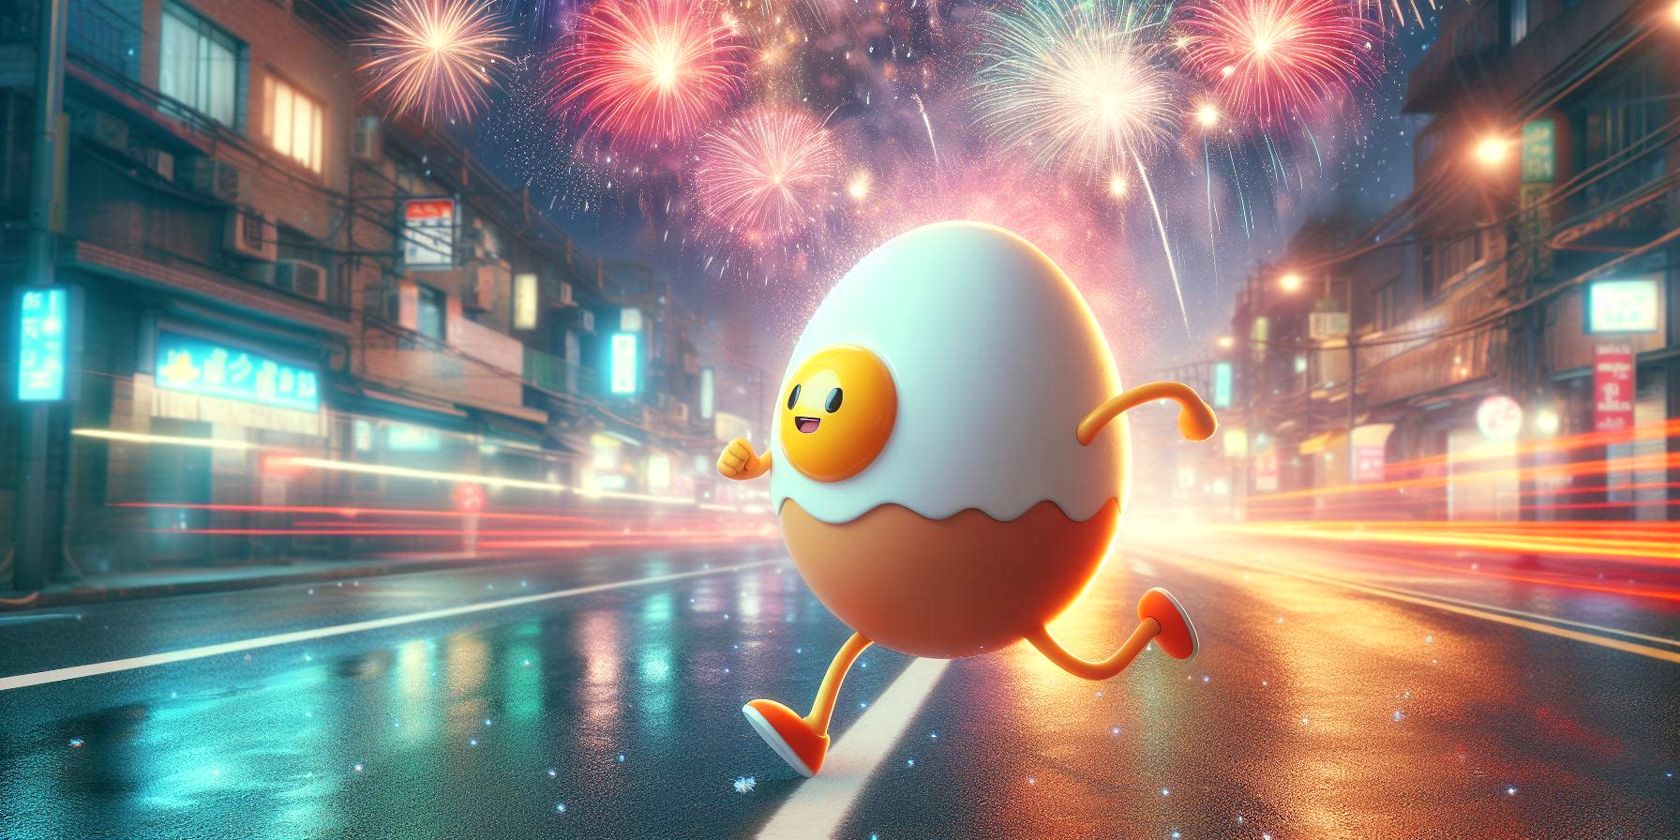 microsoft copilot image creator egg running through the streets with fireworks background